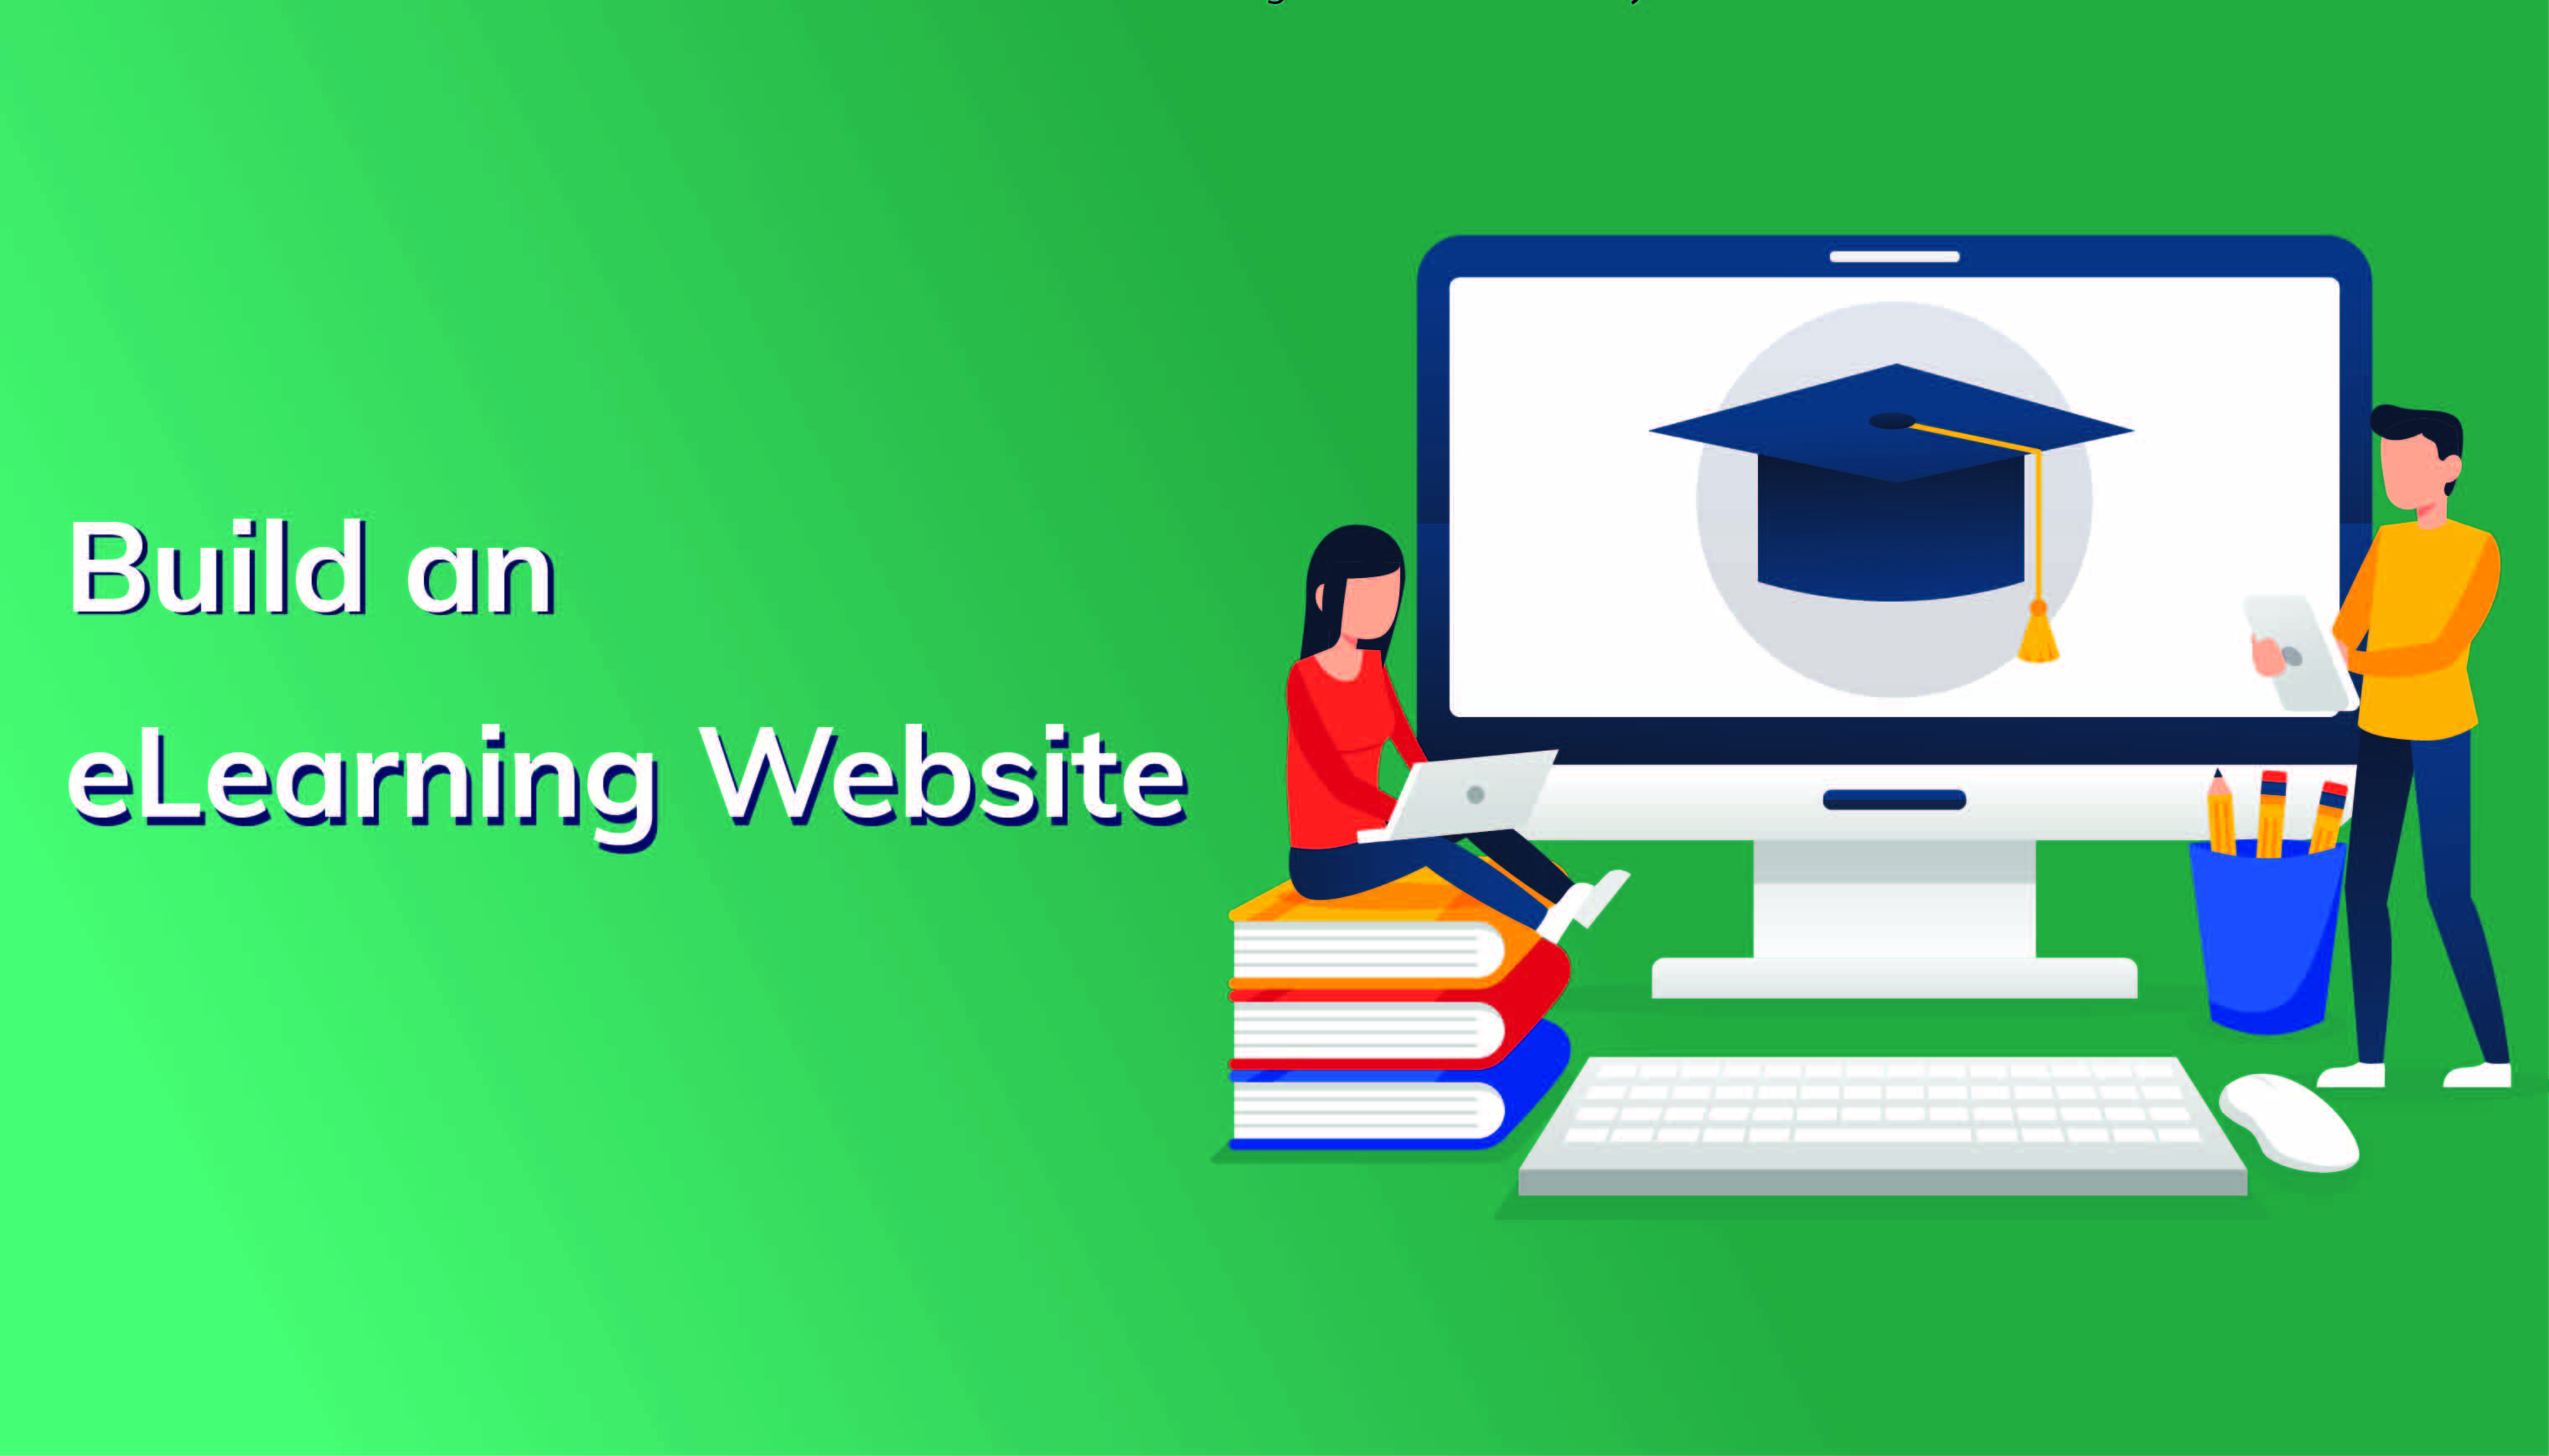 How To Build An eLearning Website Like Udemy Or Coursera